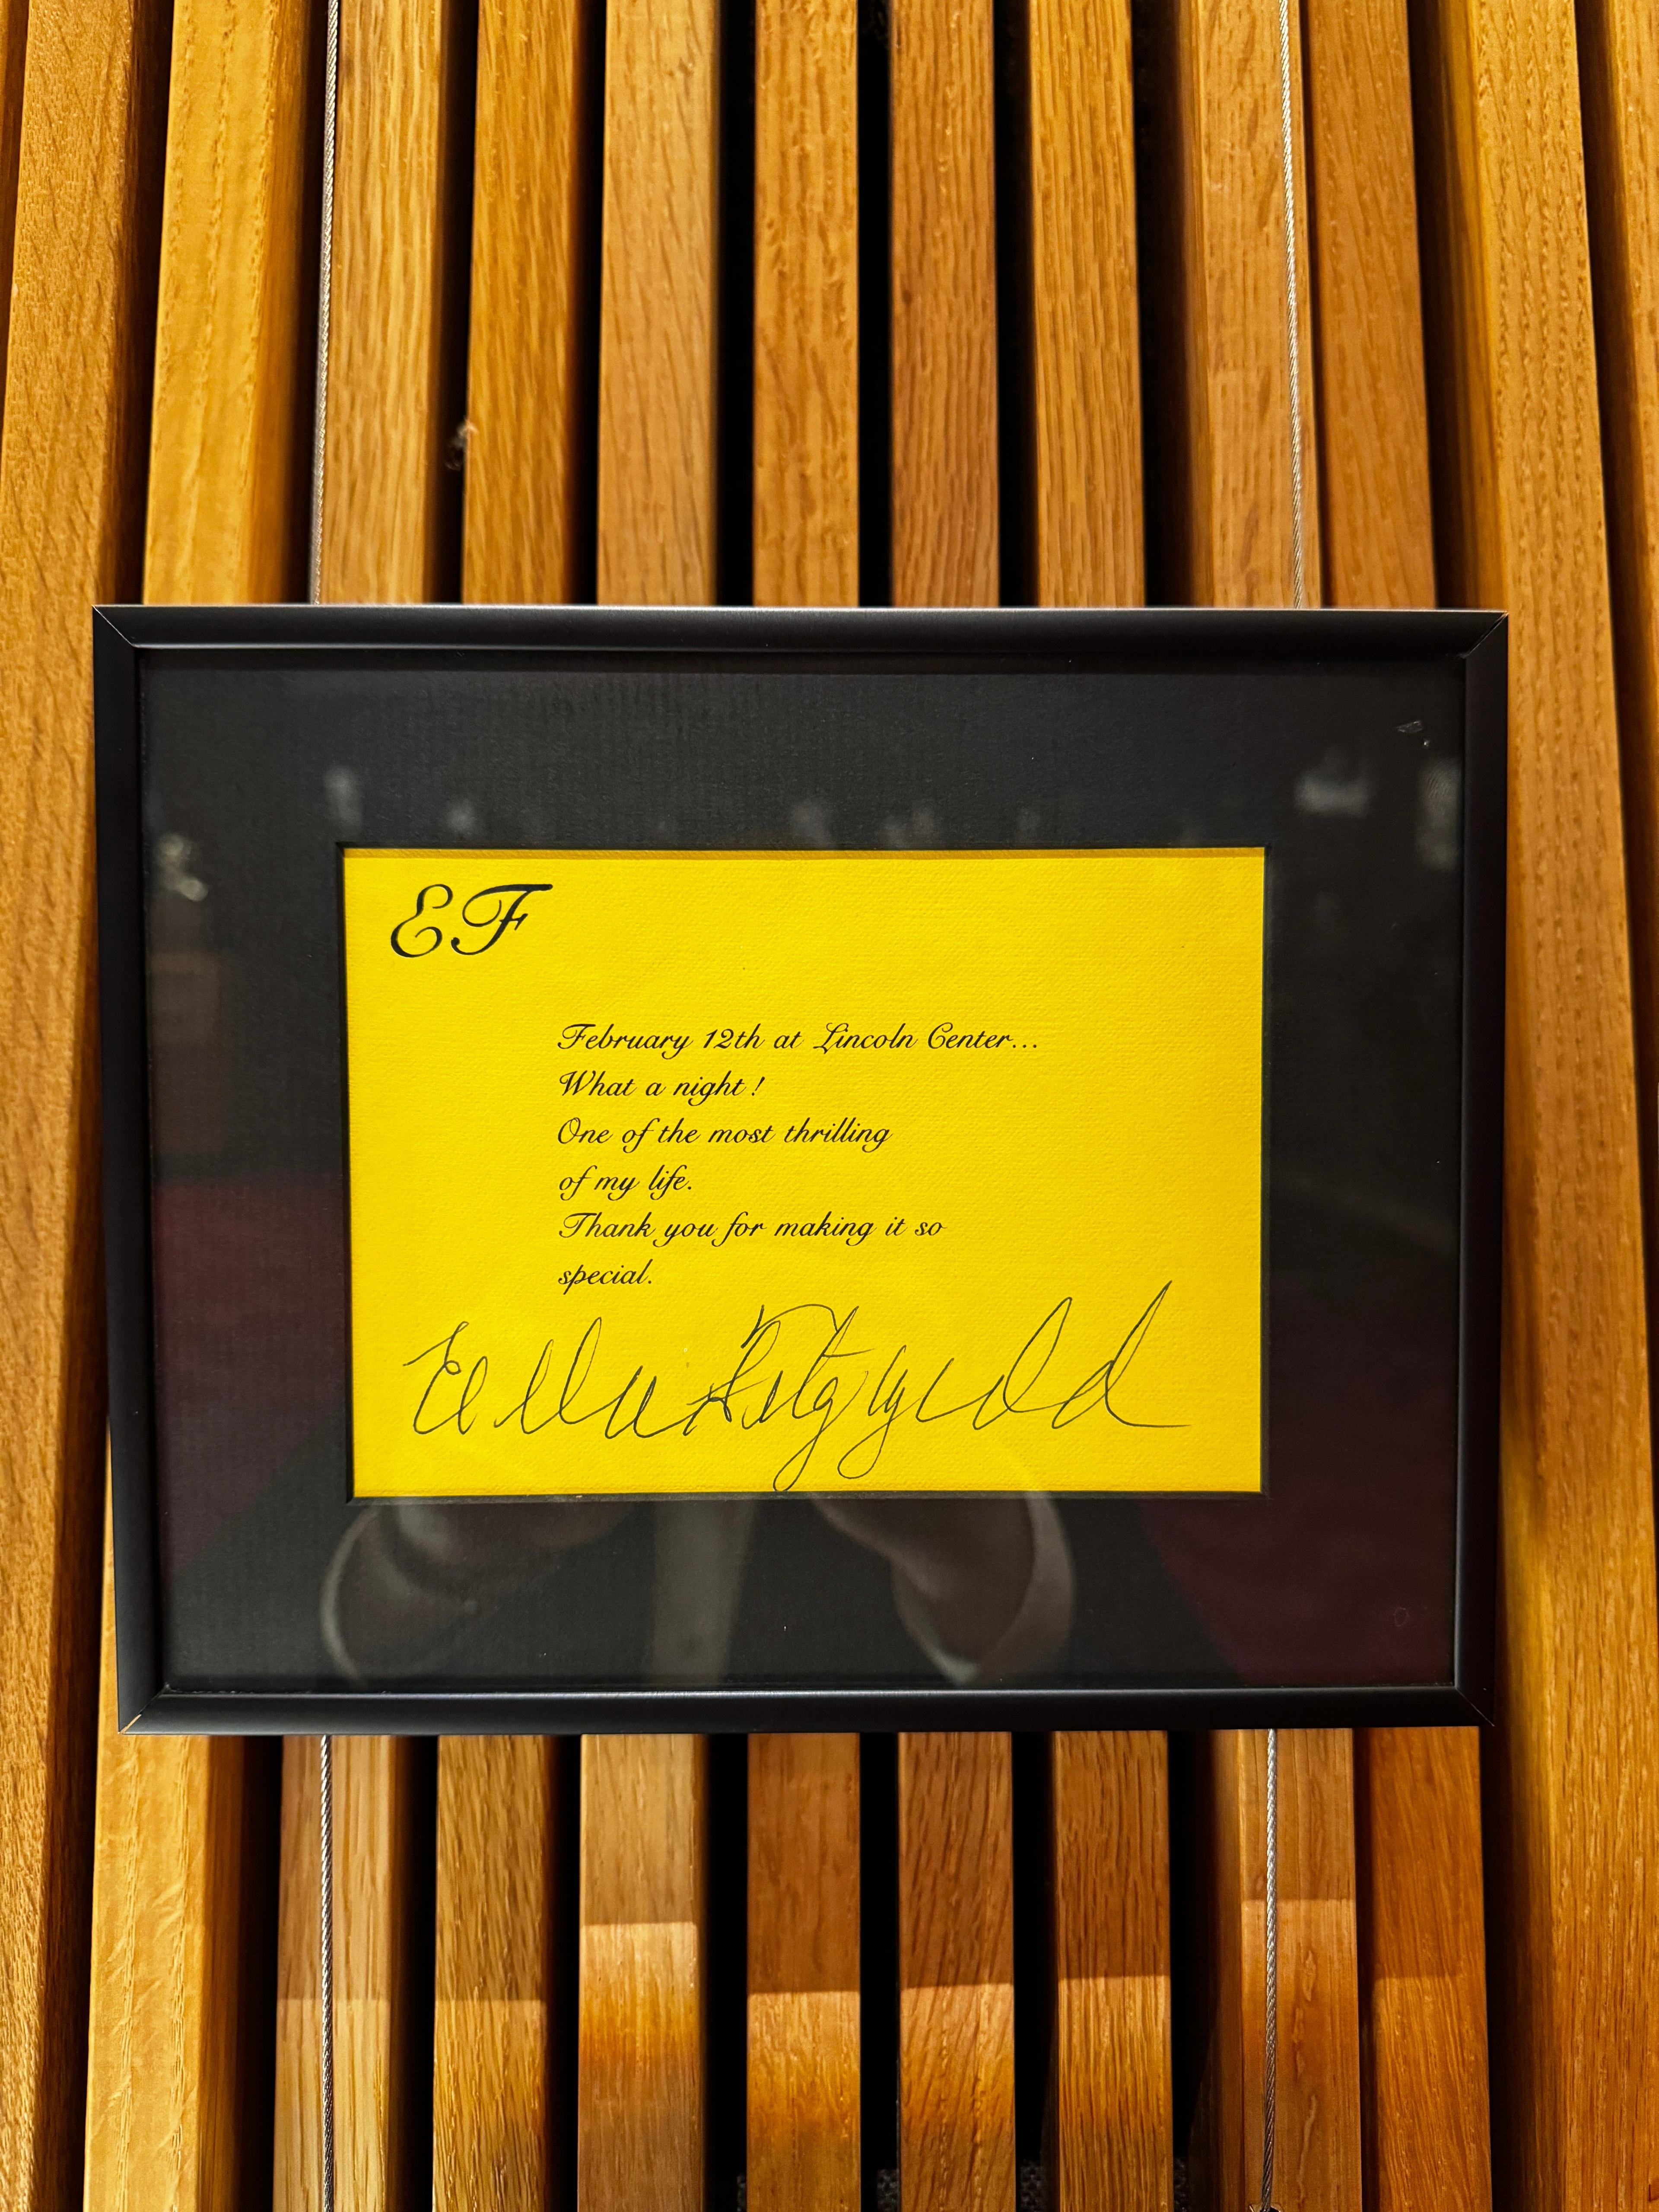 A framed yellow piece of paper on a black background